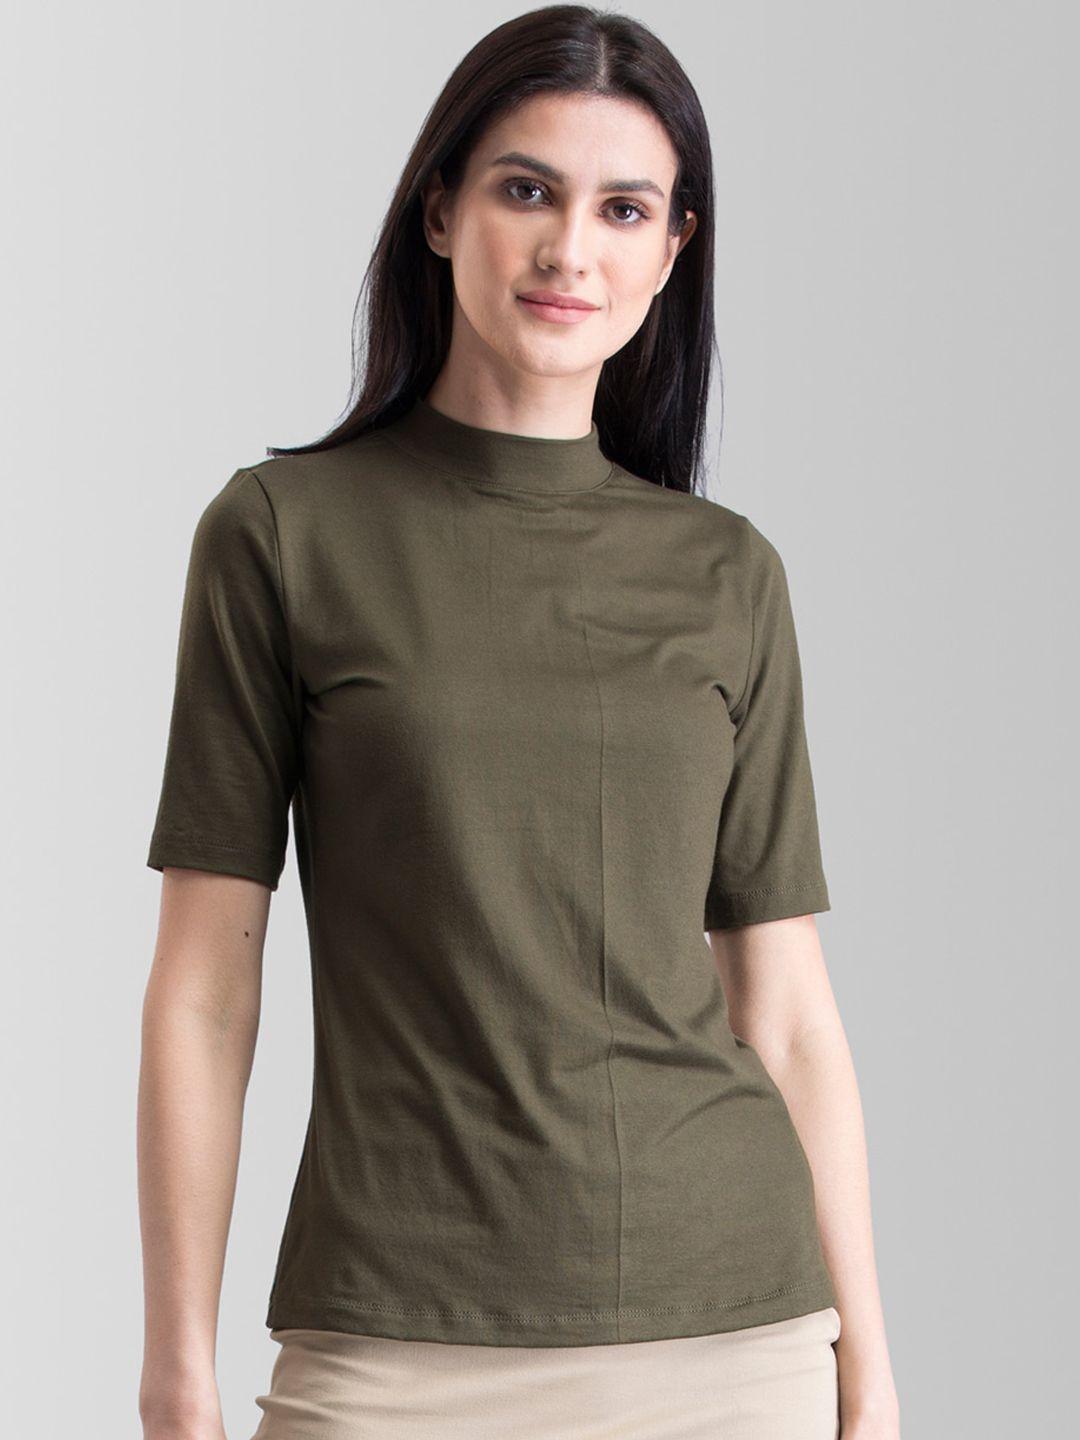 fablestreet women olive green solid round neck t-shirt